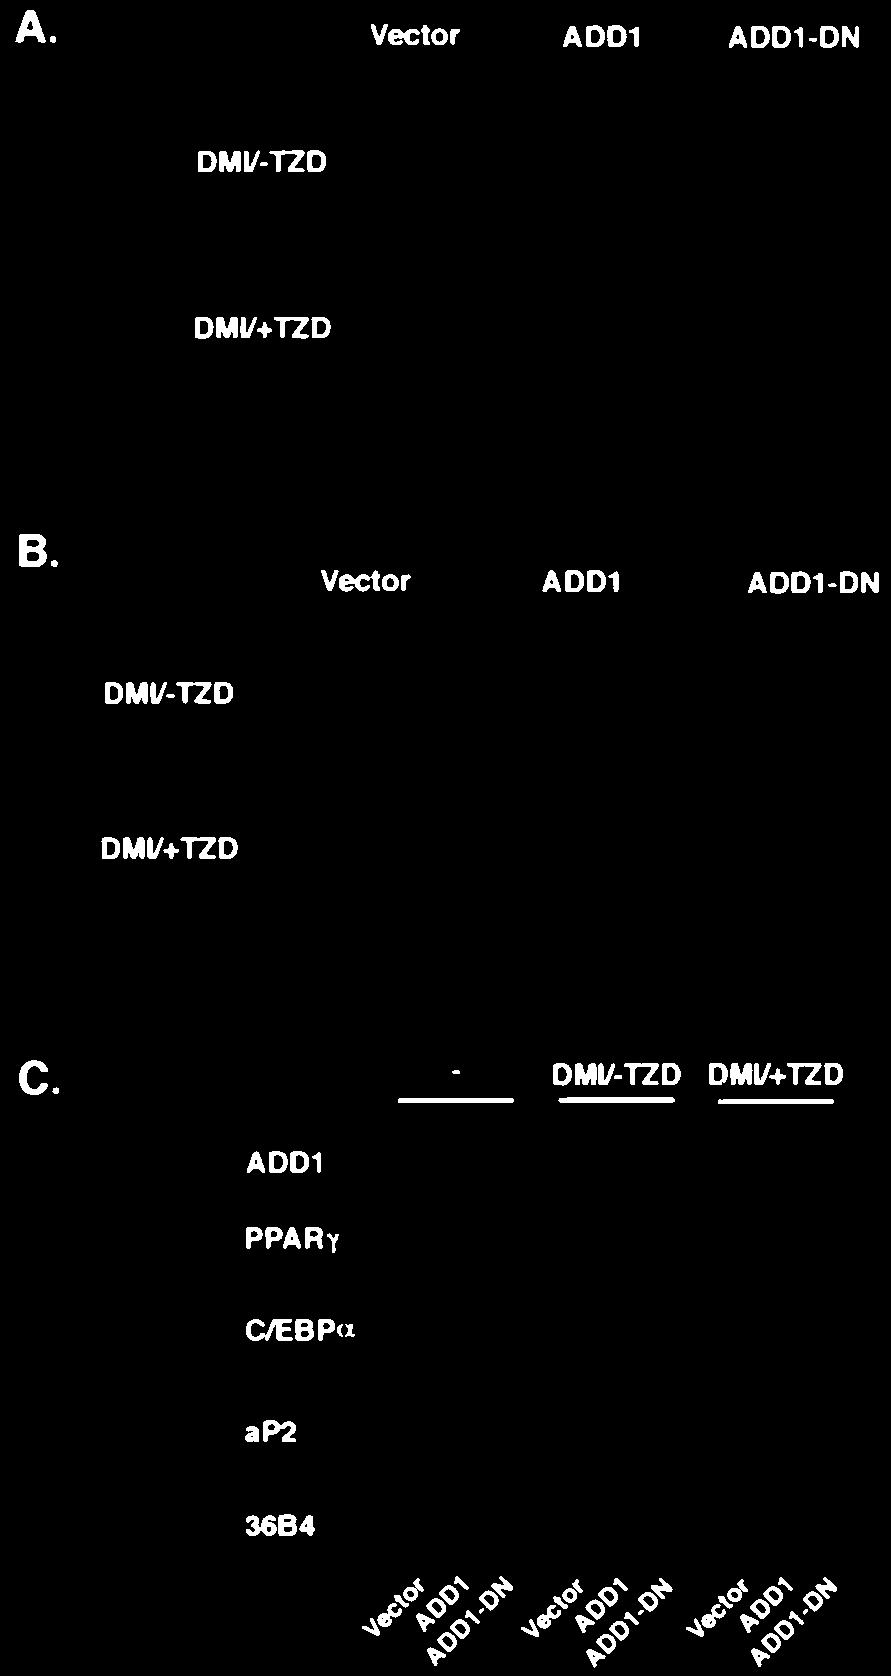 3T3-L1-vector, -ADD1, and -ADD1-DN cell lines were treated with differentiation inducers in the absence (DMI -TZD) or presence (DMI TZD) of the TZD ligand pioglitazone (5 M) for 48 hr at confluence